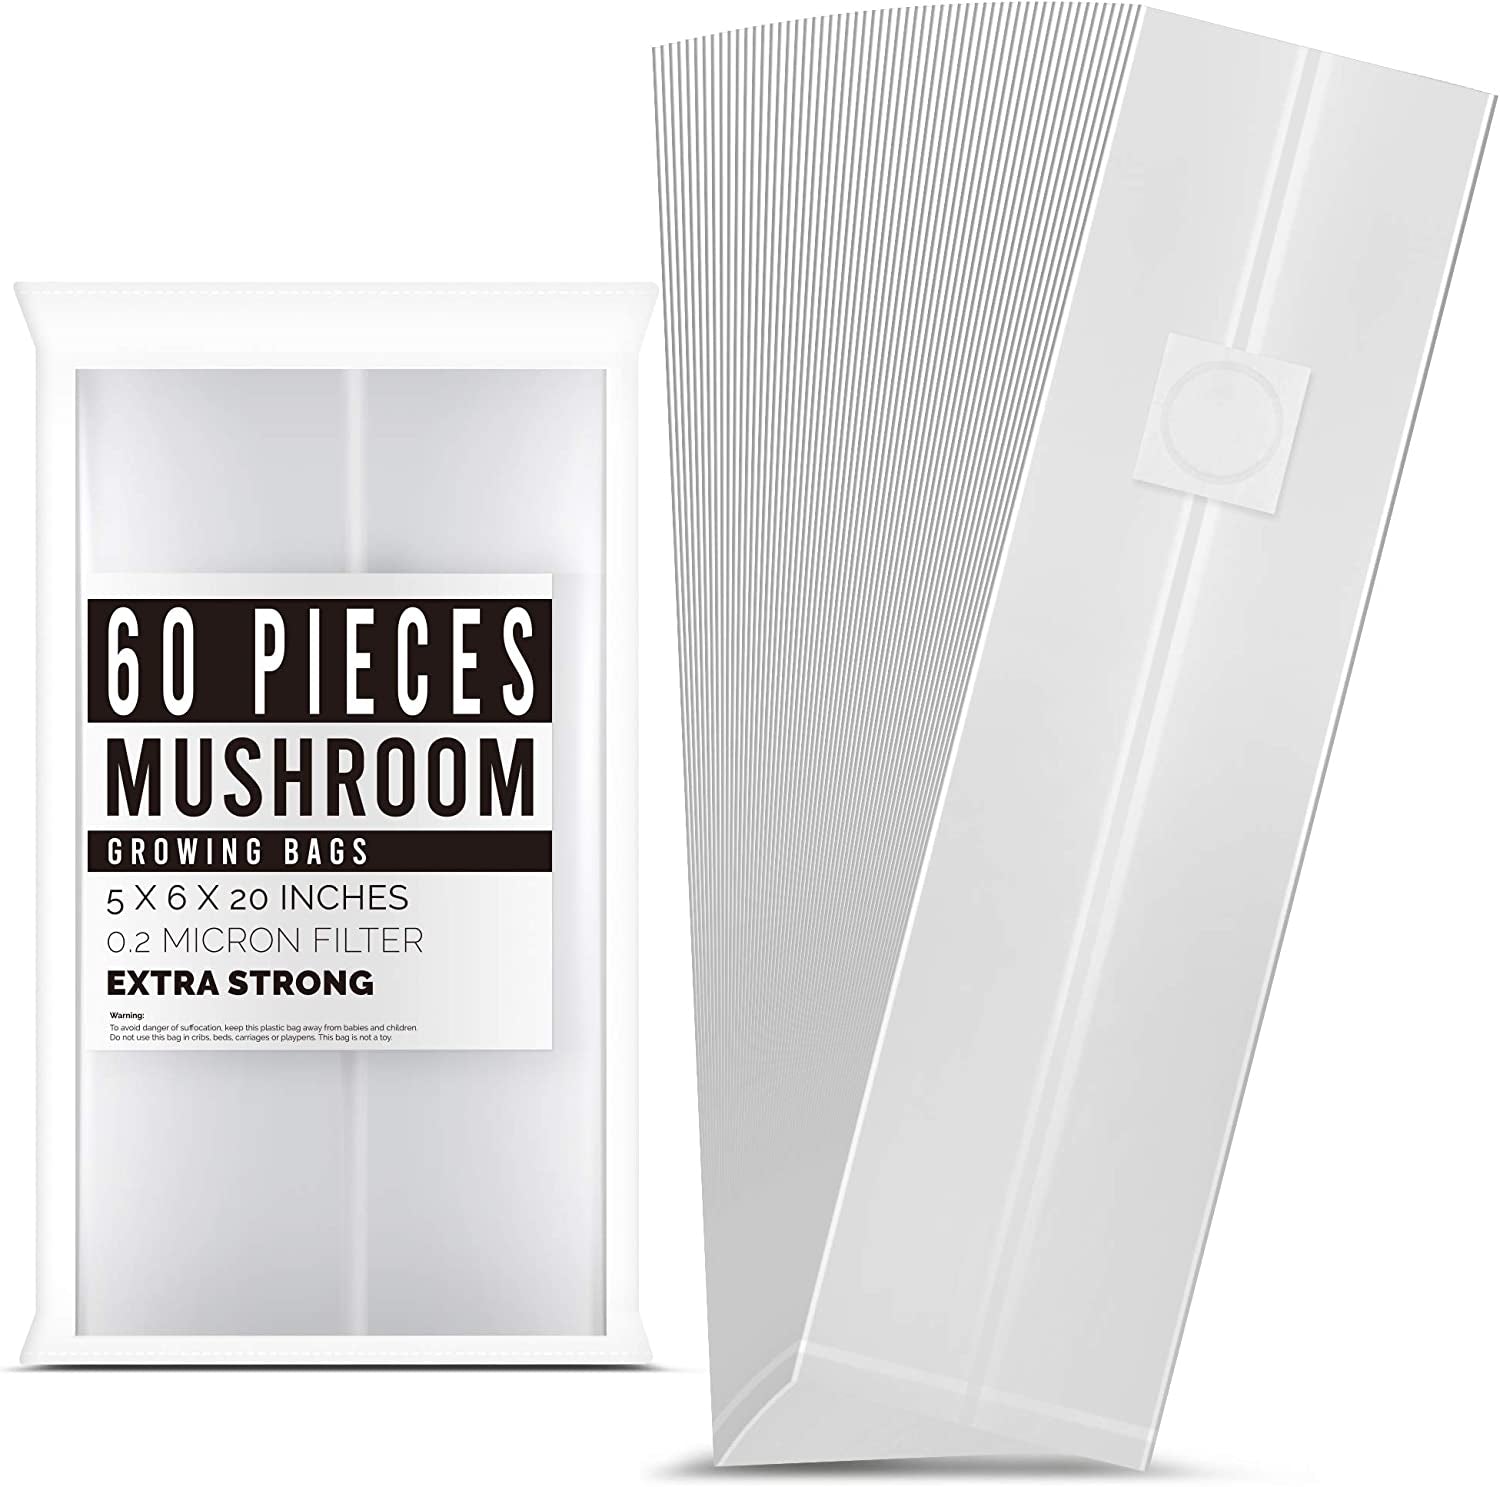 LOSTRONAUT, LOSTRONAUT 60-Pack Mushroom Grow Bags | Extra Strong Large Size Breathable Autoclavable Spawn CO2 Bag for Growing Mushrooms | Tear-Proof 6'' X 5'' X 20''.2 Micron Filter, 4.8Mil